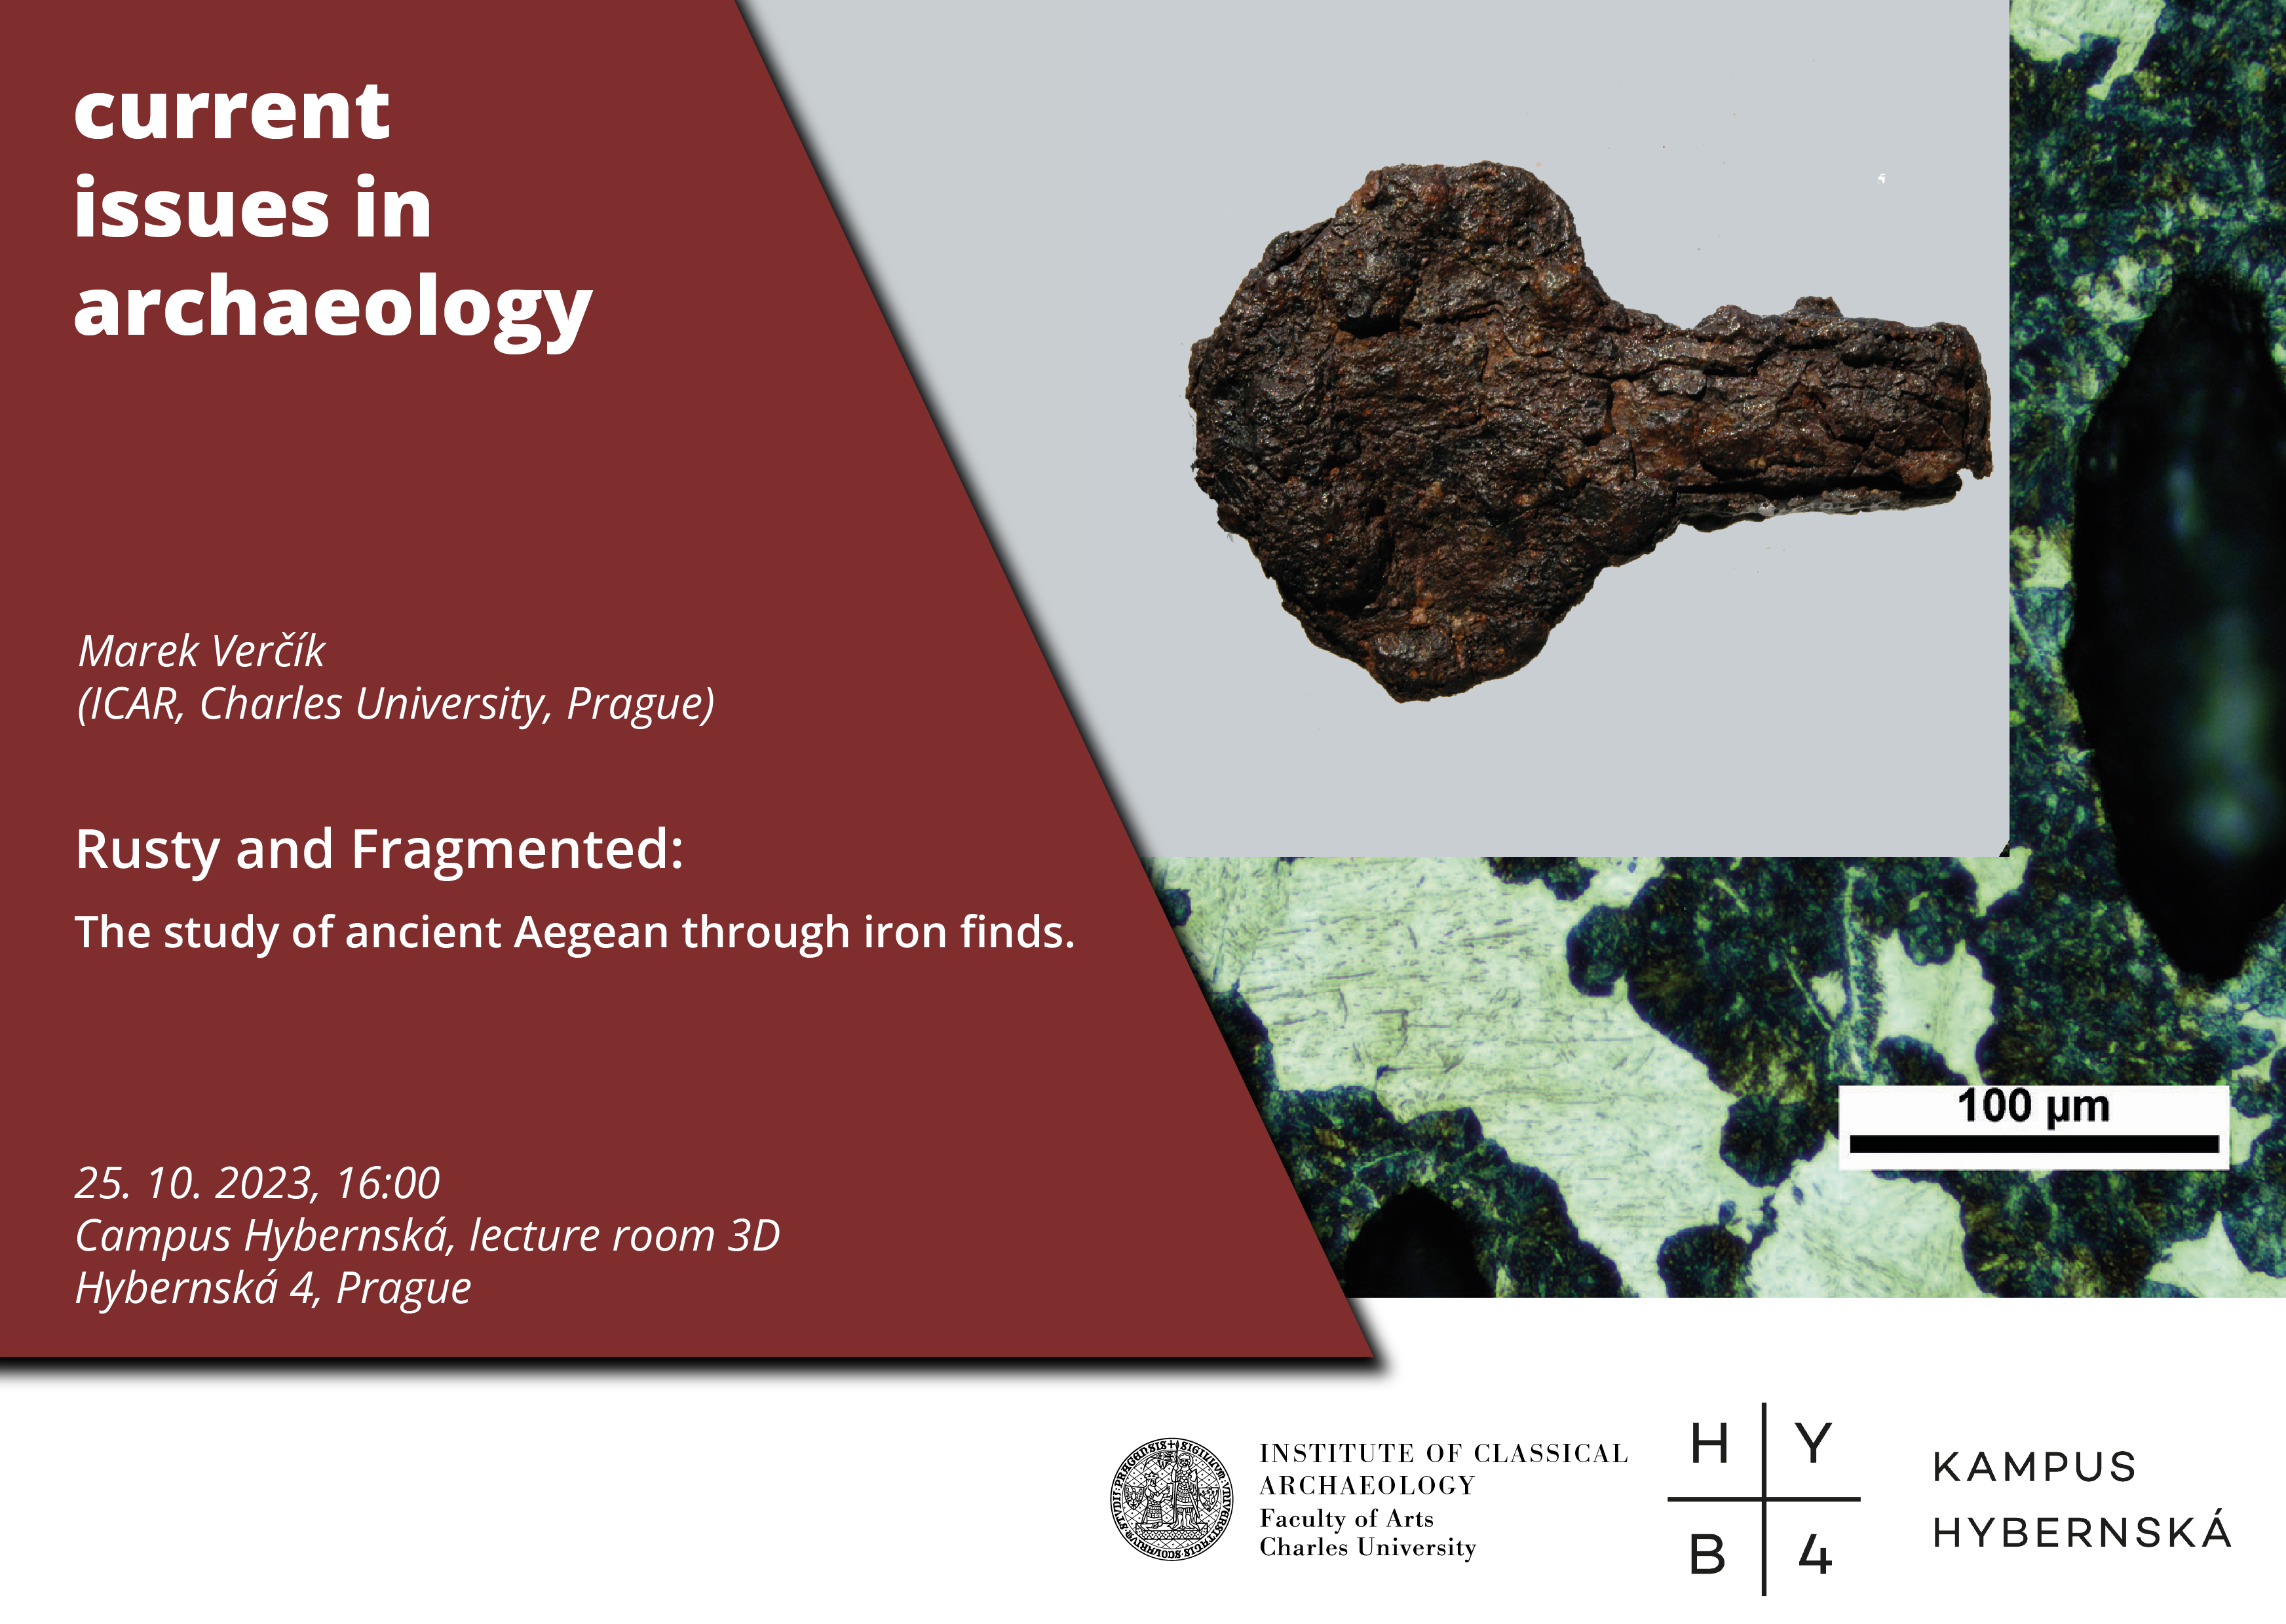 M. Verčík (Praha): "Rusty and fragmented. The study of ancient Aegean through iron finds" @ Kampus Hybernská, lecture room 3D